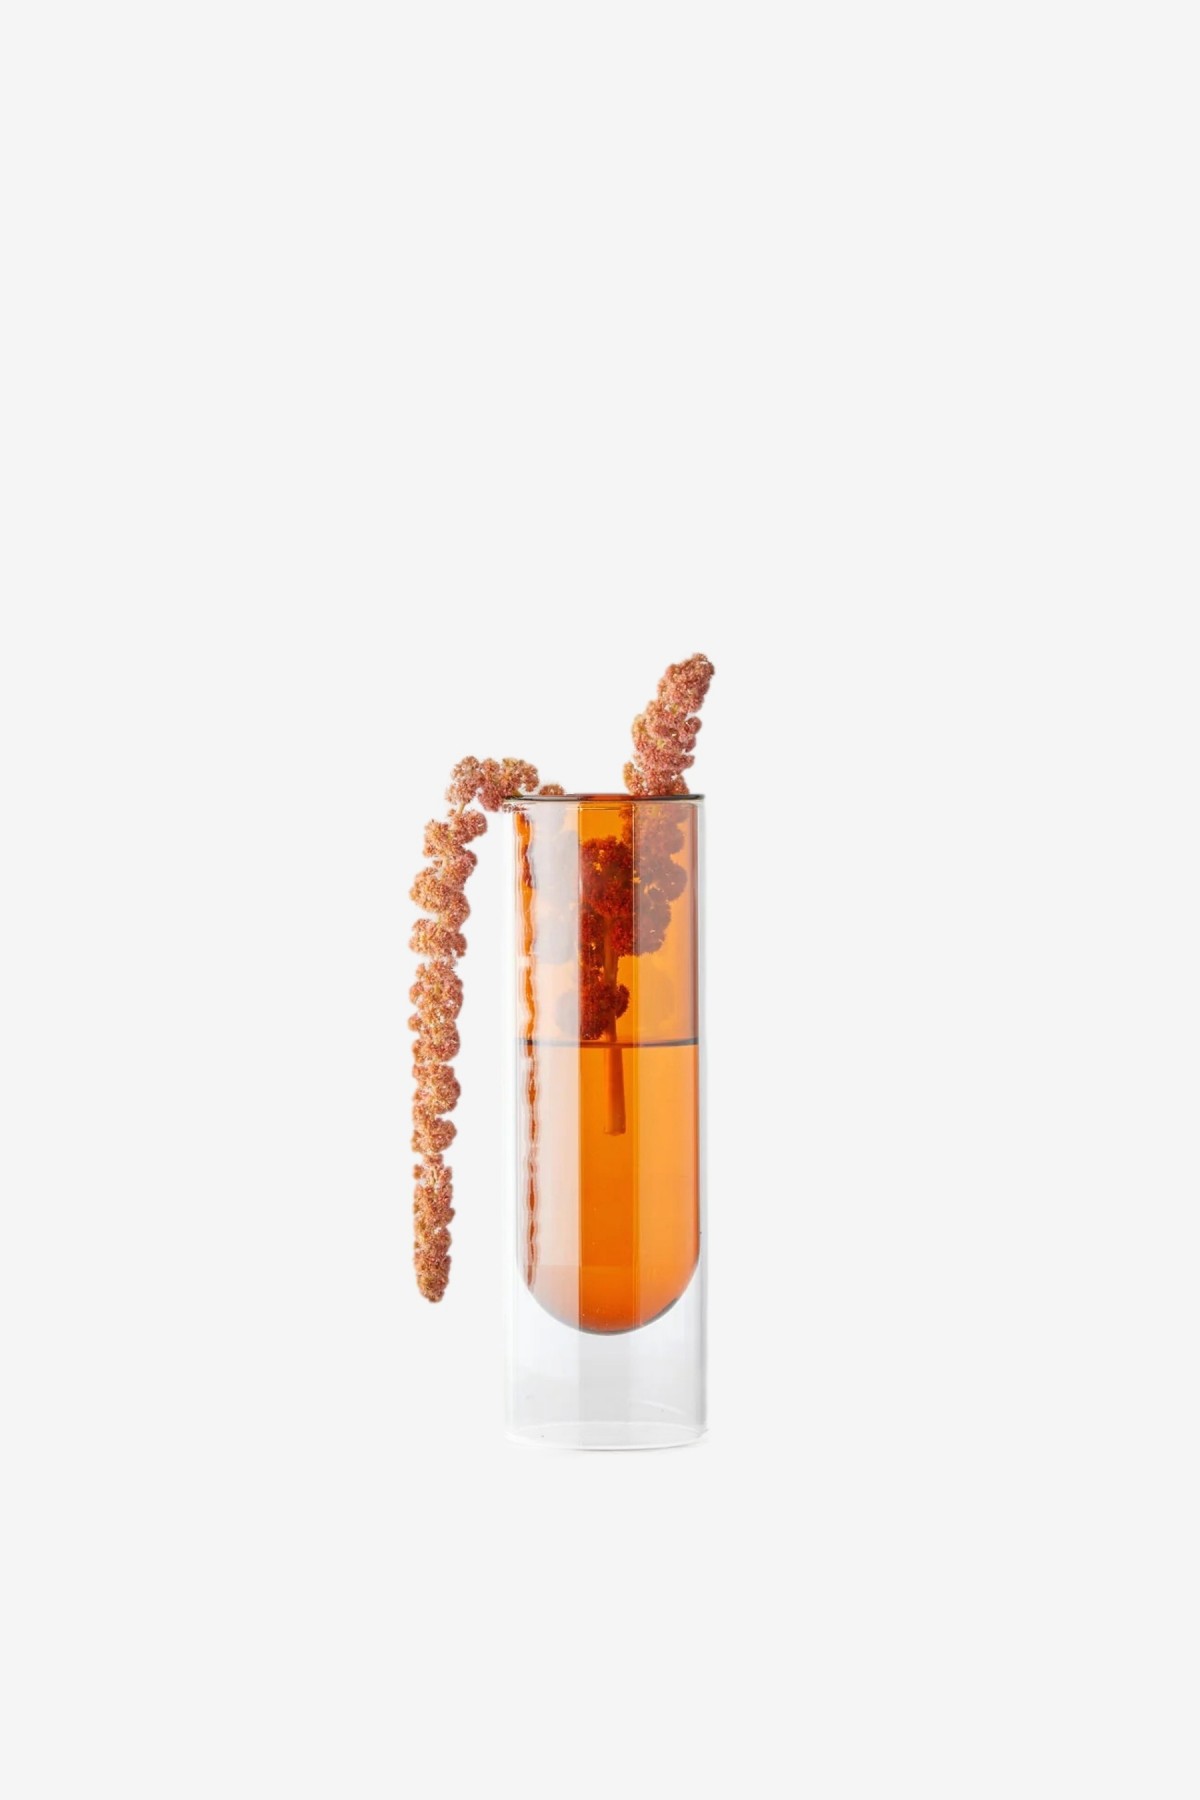 Studio About Flower Tube Tall in Amber